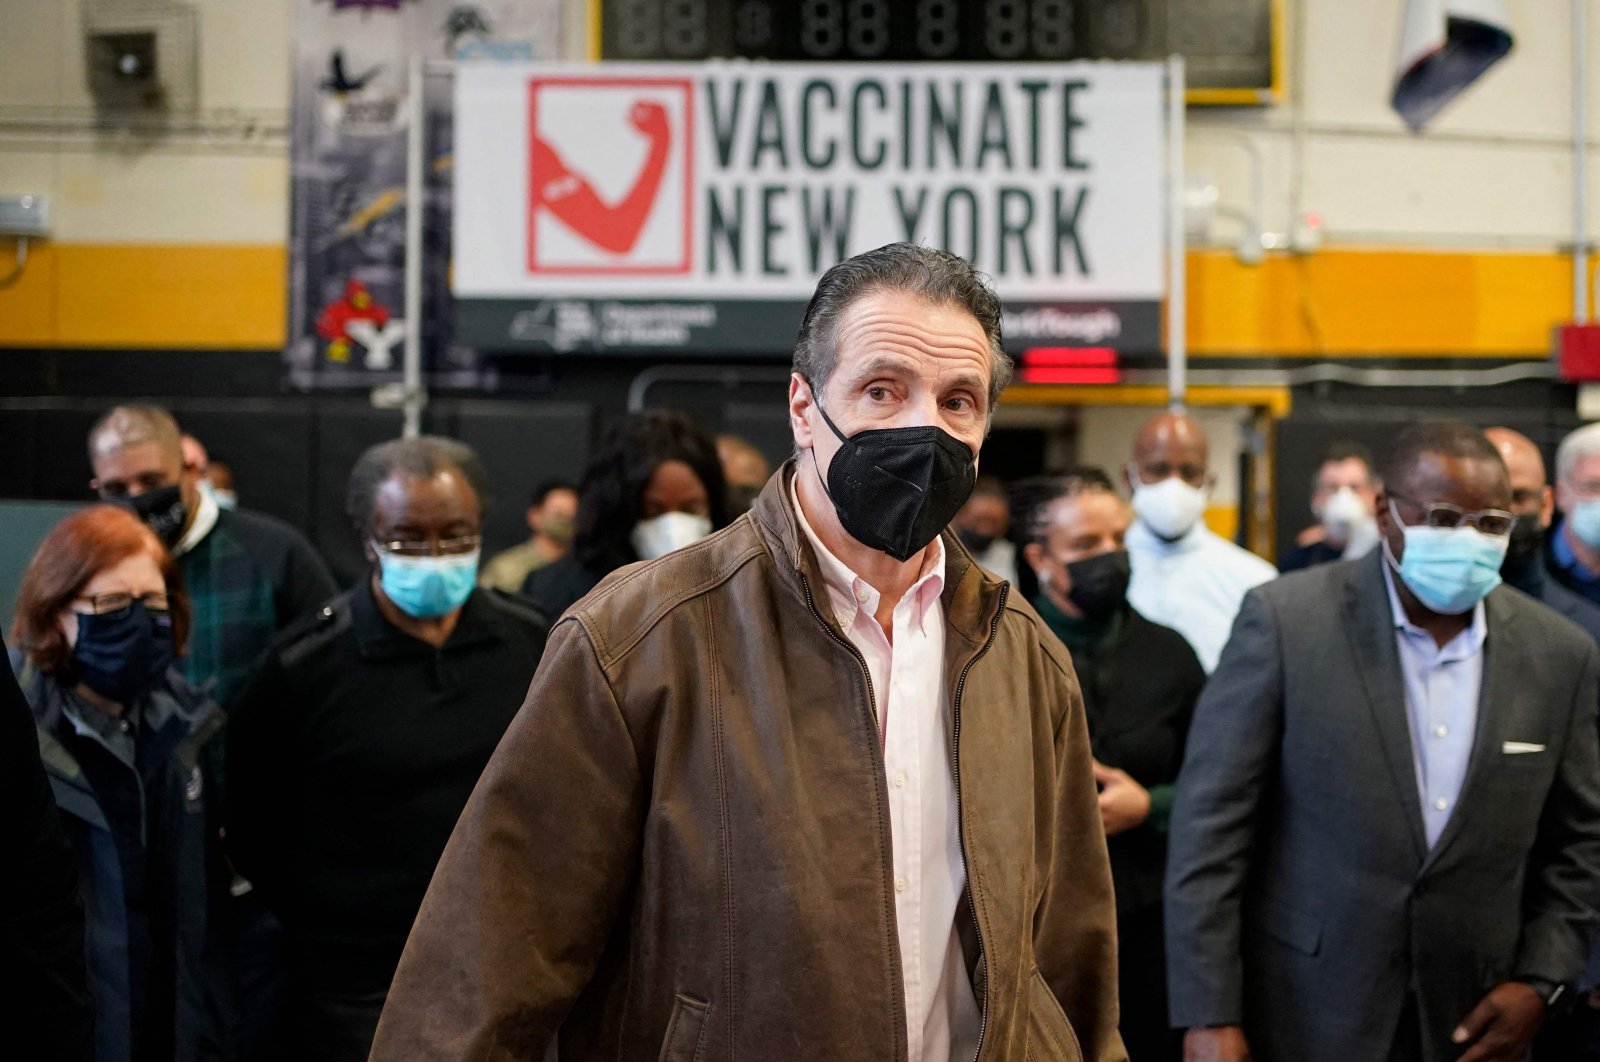 New York Gov. Andrew Cuomo arrives at a vaccination site in the Brooklyn borough of New York City, New York, U.S., Feb. 22, 2021. (AFP Photo)